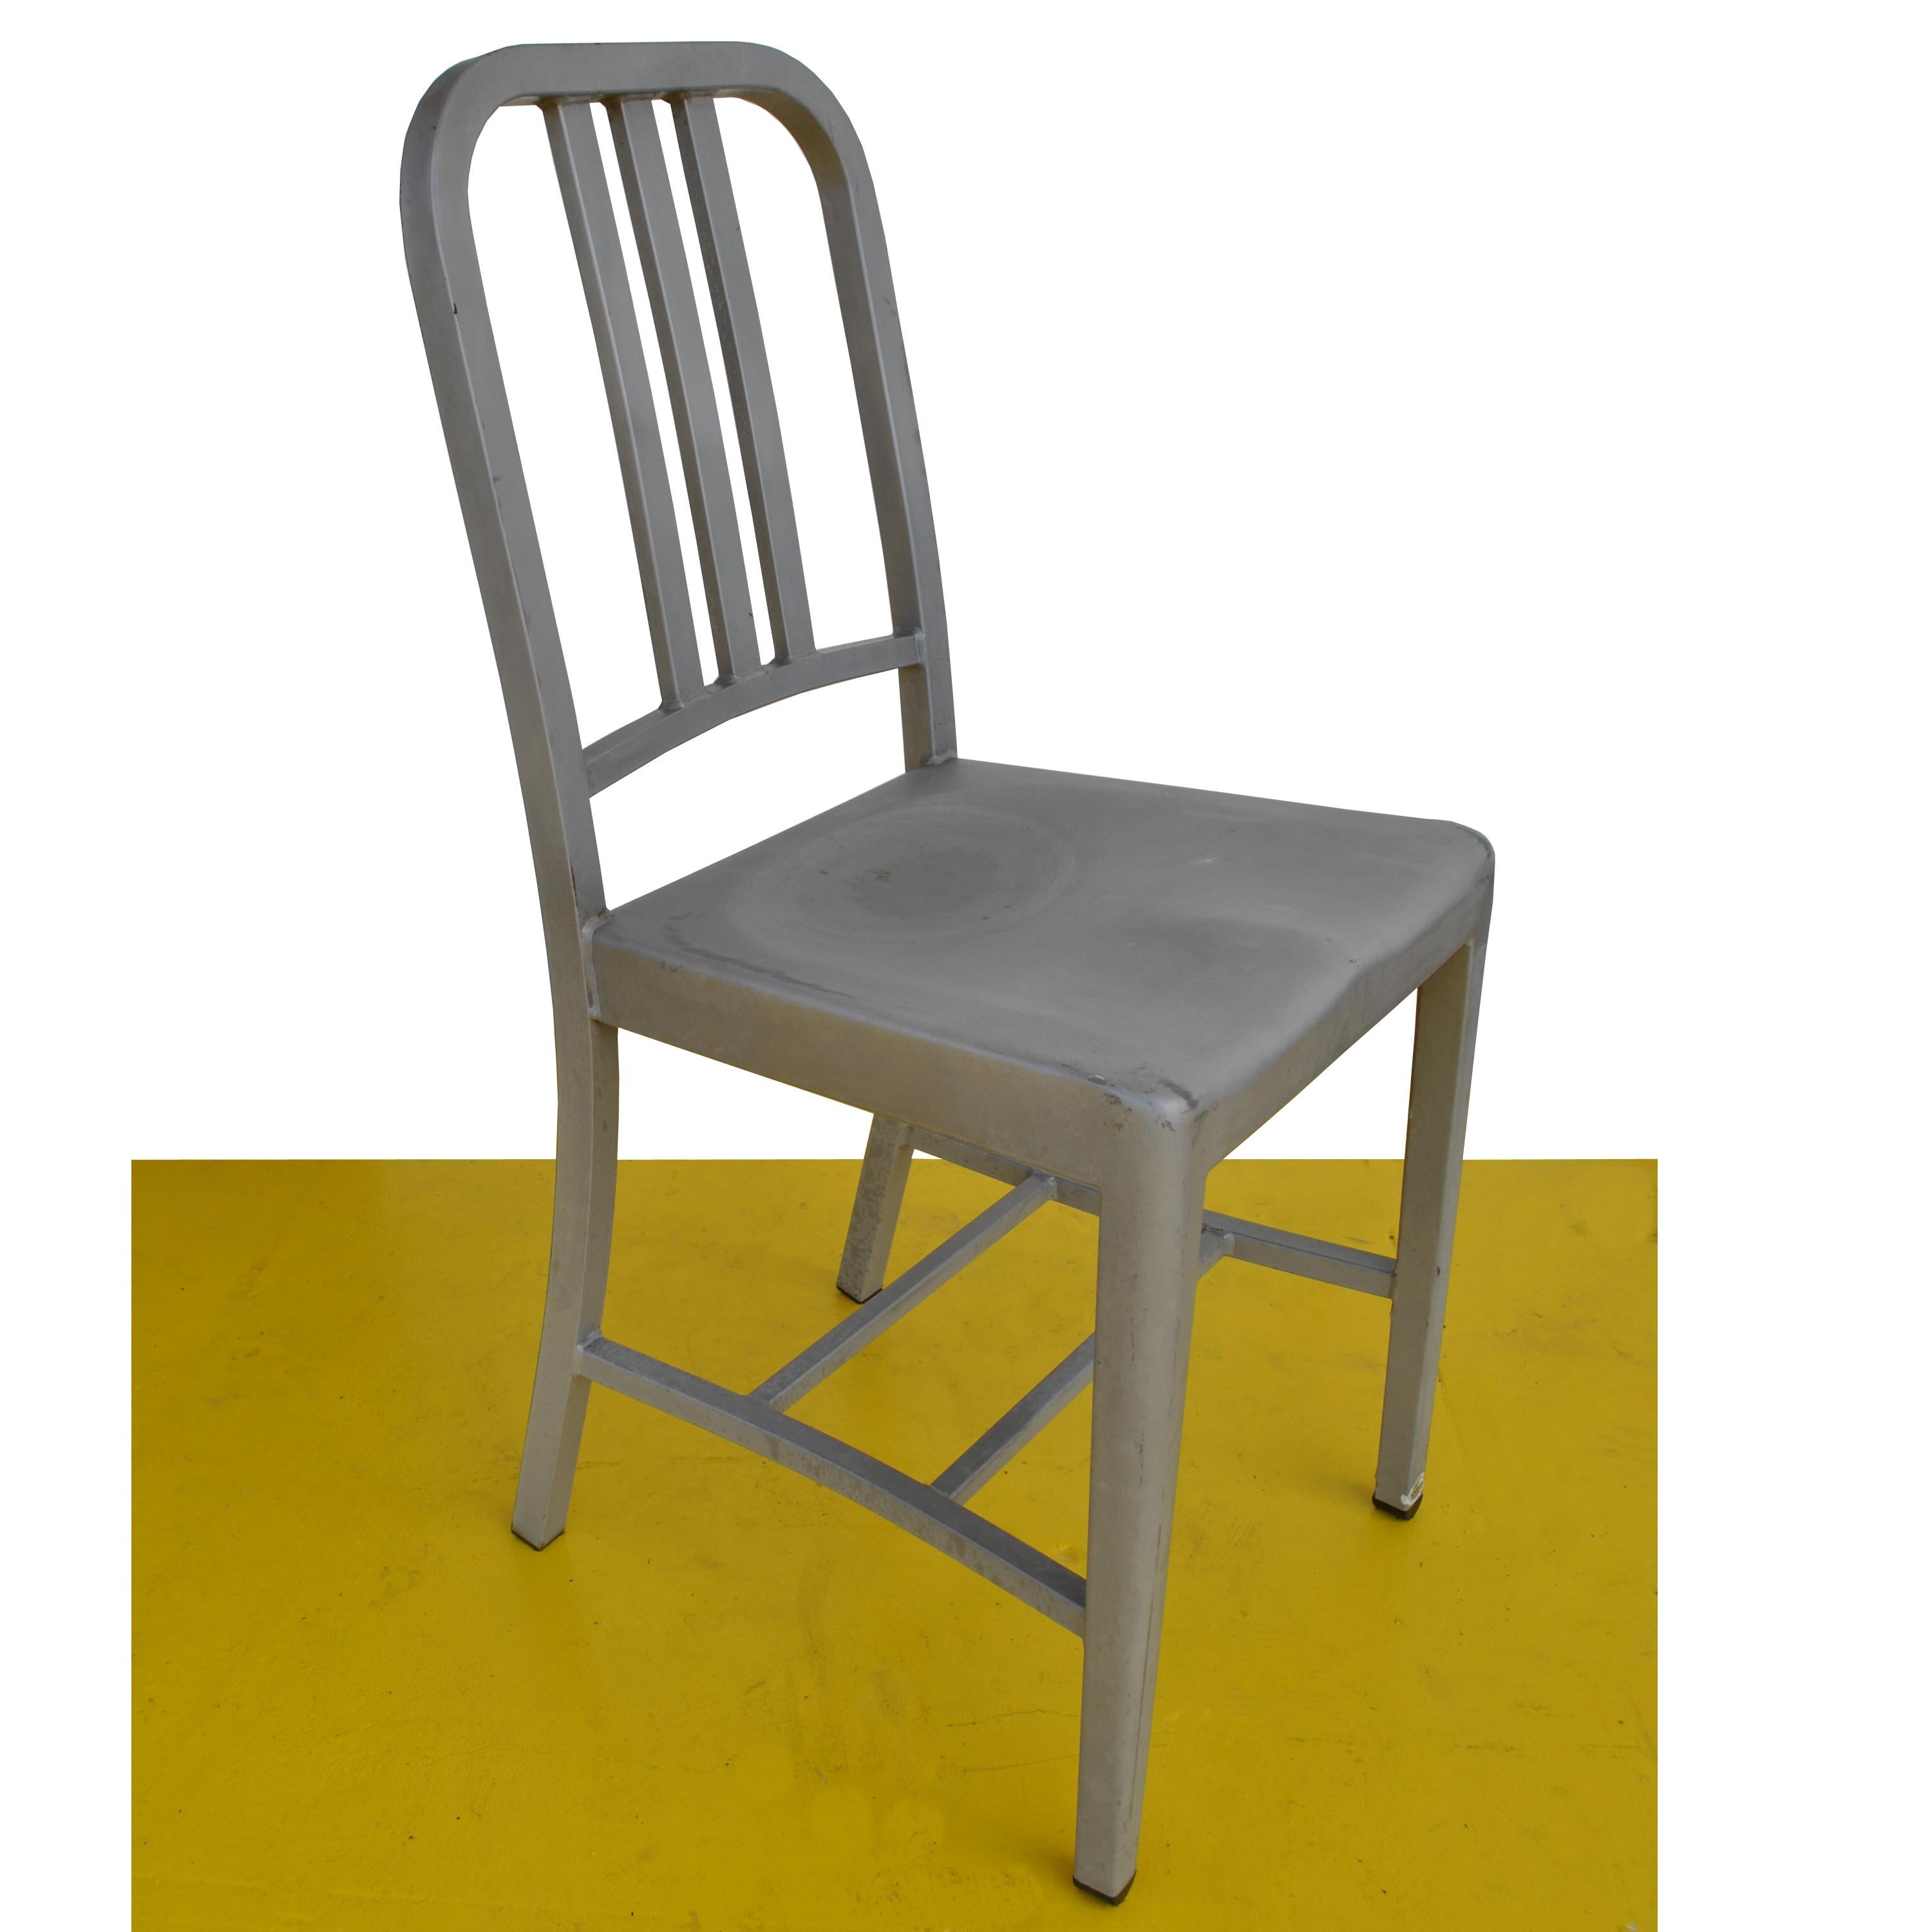 The Emeco navy aluminum chair, developed in collaboration with Alcoa in 1944, was designed for US Submarines. The navy utilized Emeco chairs because they are impervious to corrosion, non-magnetic, lightweight, fireproof and incredibly strong.
Emeco